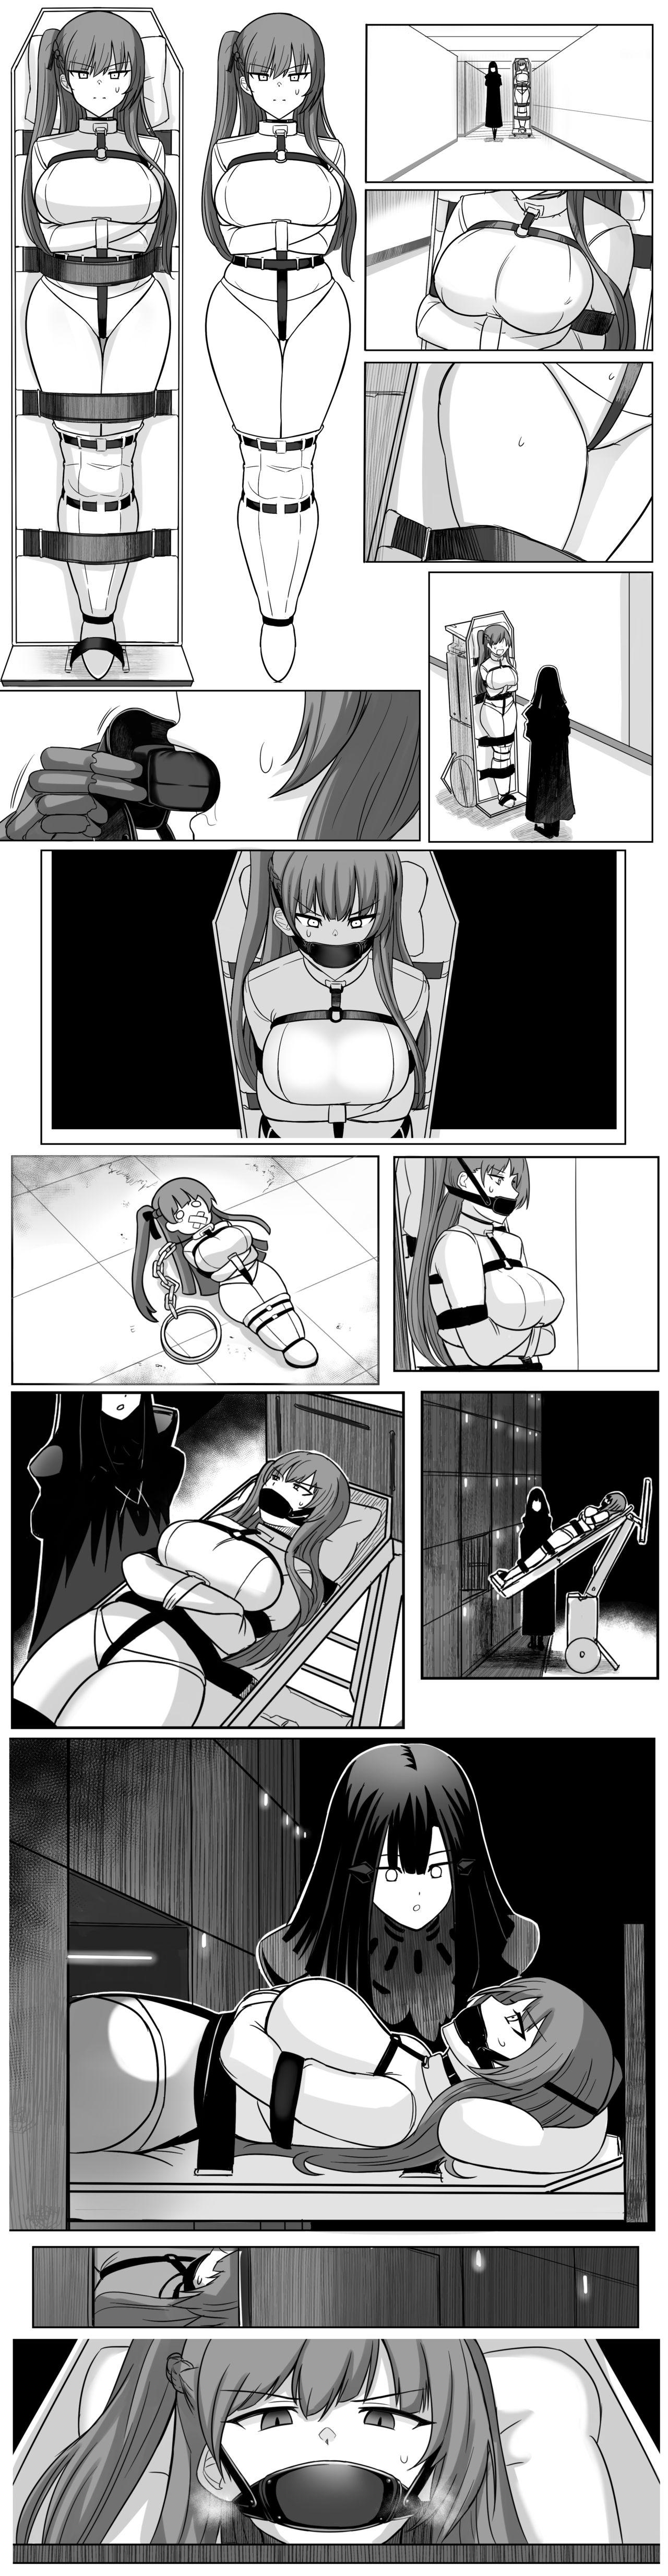 Cream Lost Dolls - Girls frontline Long Hair - Page 10